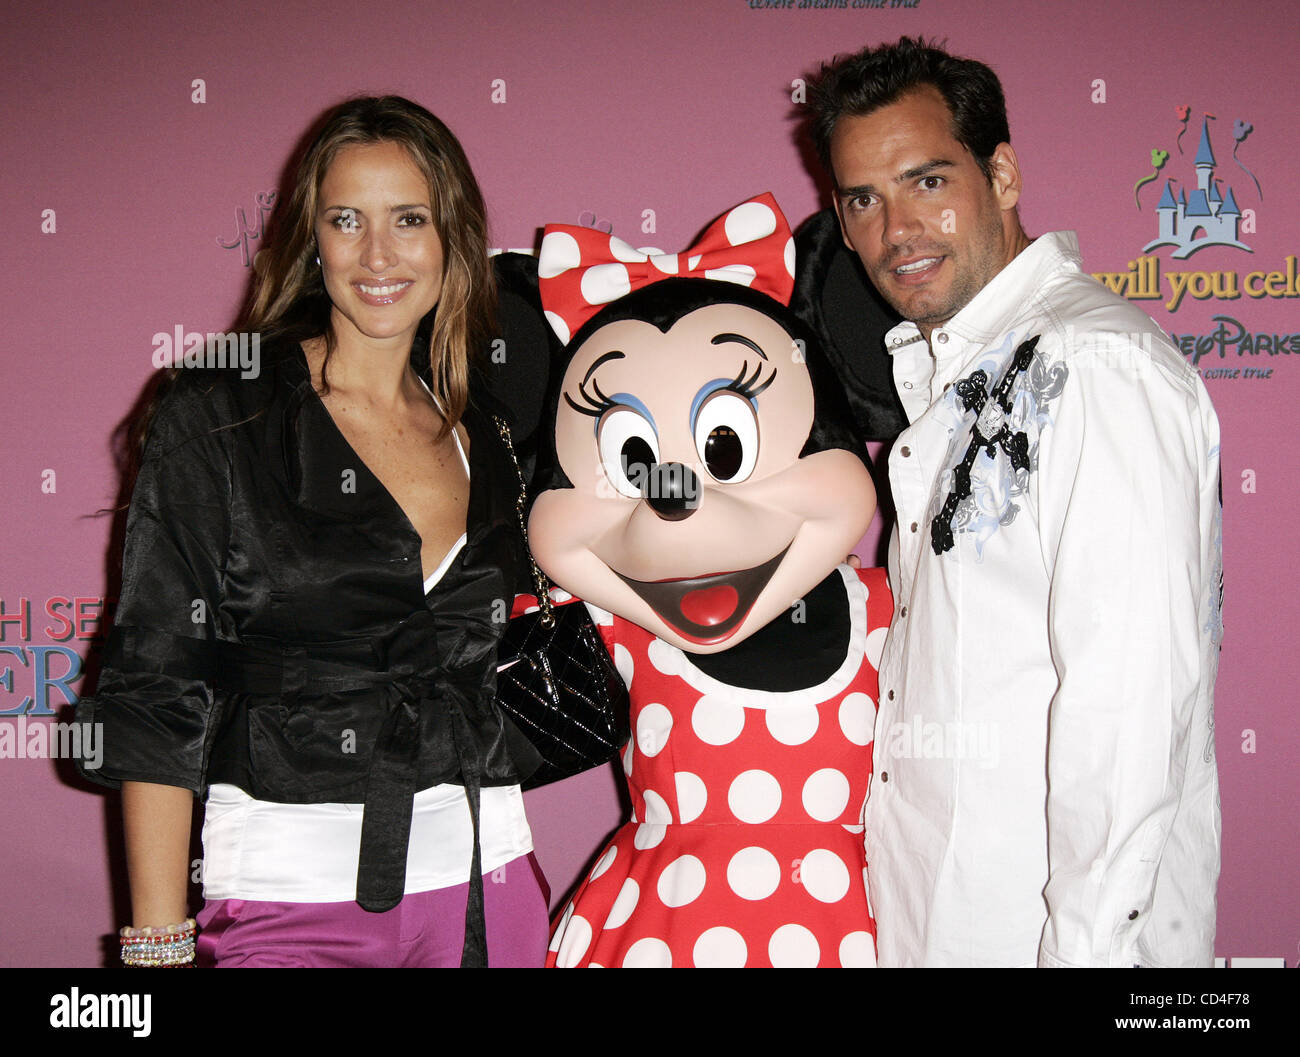 Oct 05, 2008 - Anaheim, California, USA - Chilean model and actor CRISTIAN DE LA FUENTE and guest with MINNIE MOUSE at the Miley Cyrus Sweet 16 Birthday Party held at Disneyland in Anaheim. (Credit Image: © Lisa O'Connor/ZUMA Press) Stock Photo